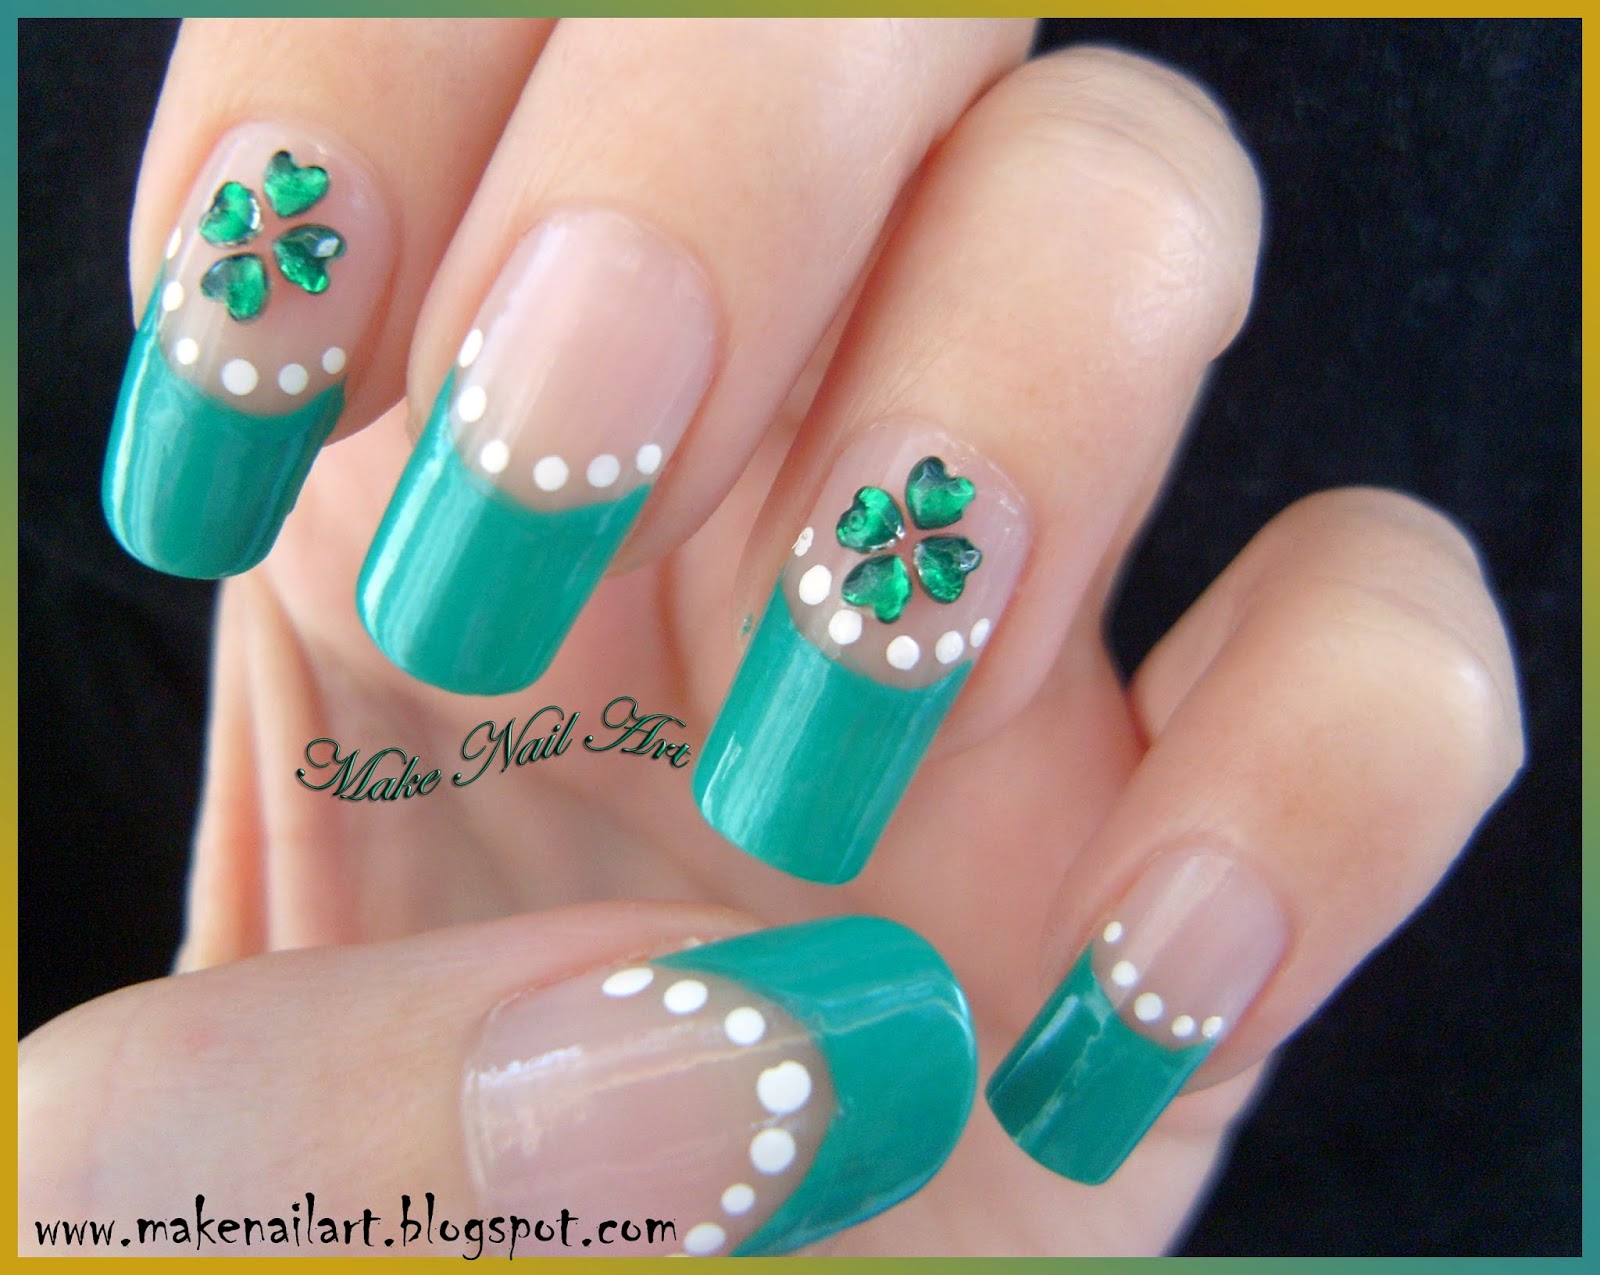 Clover French Tip Nails - wide 5